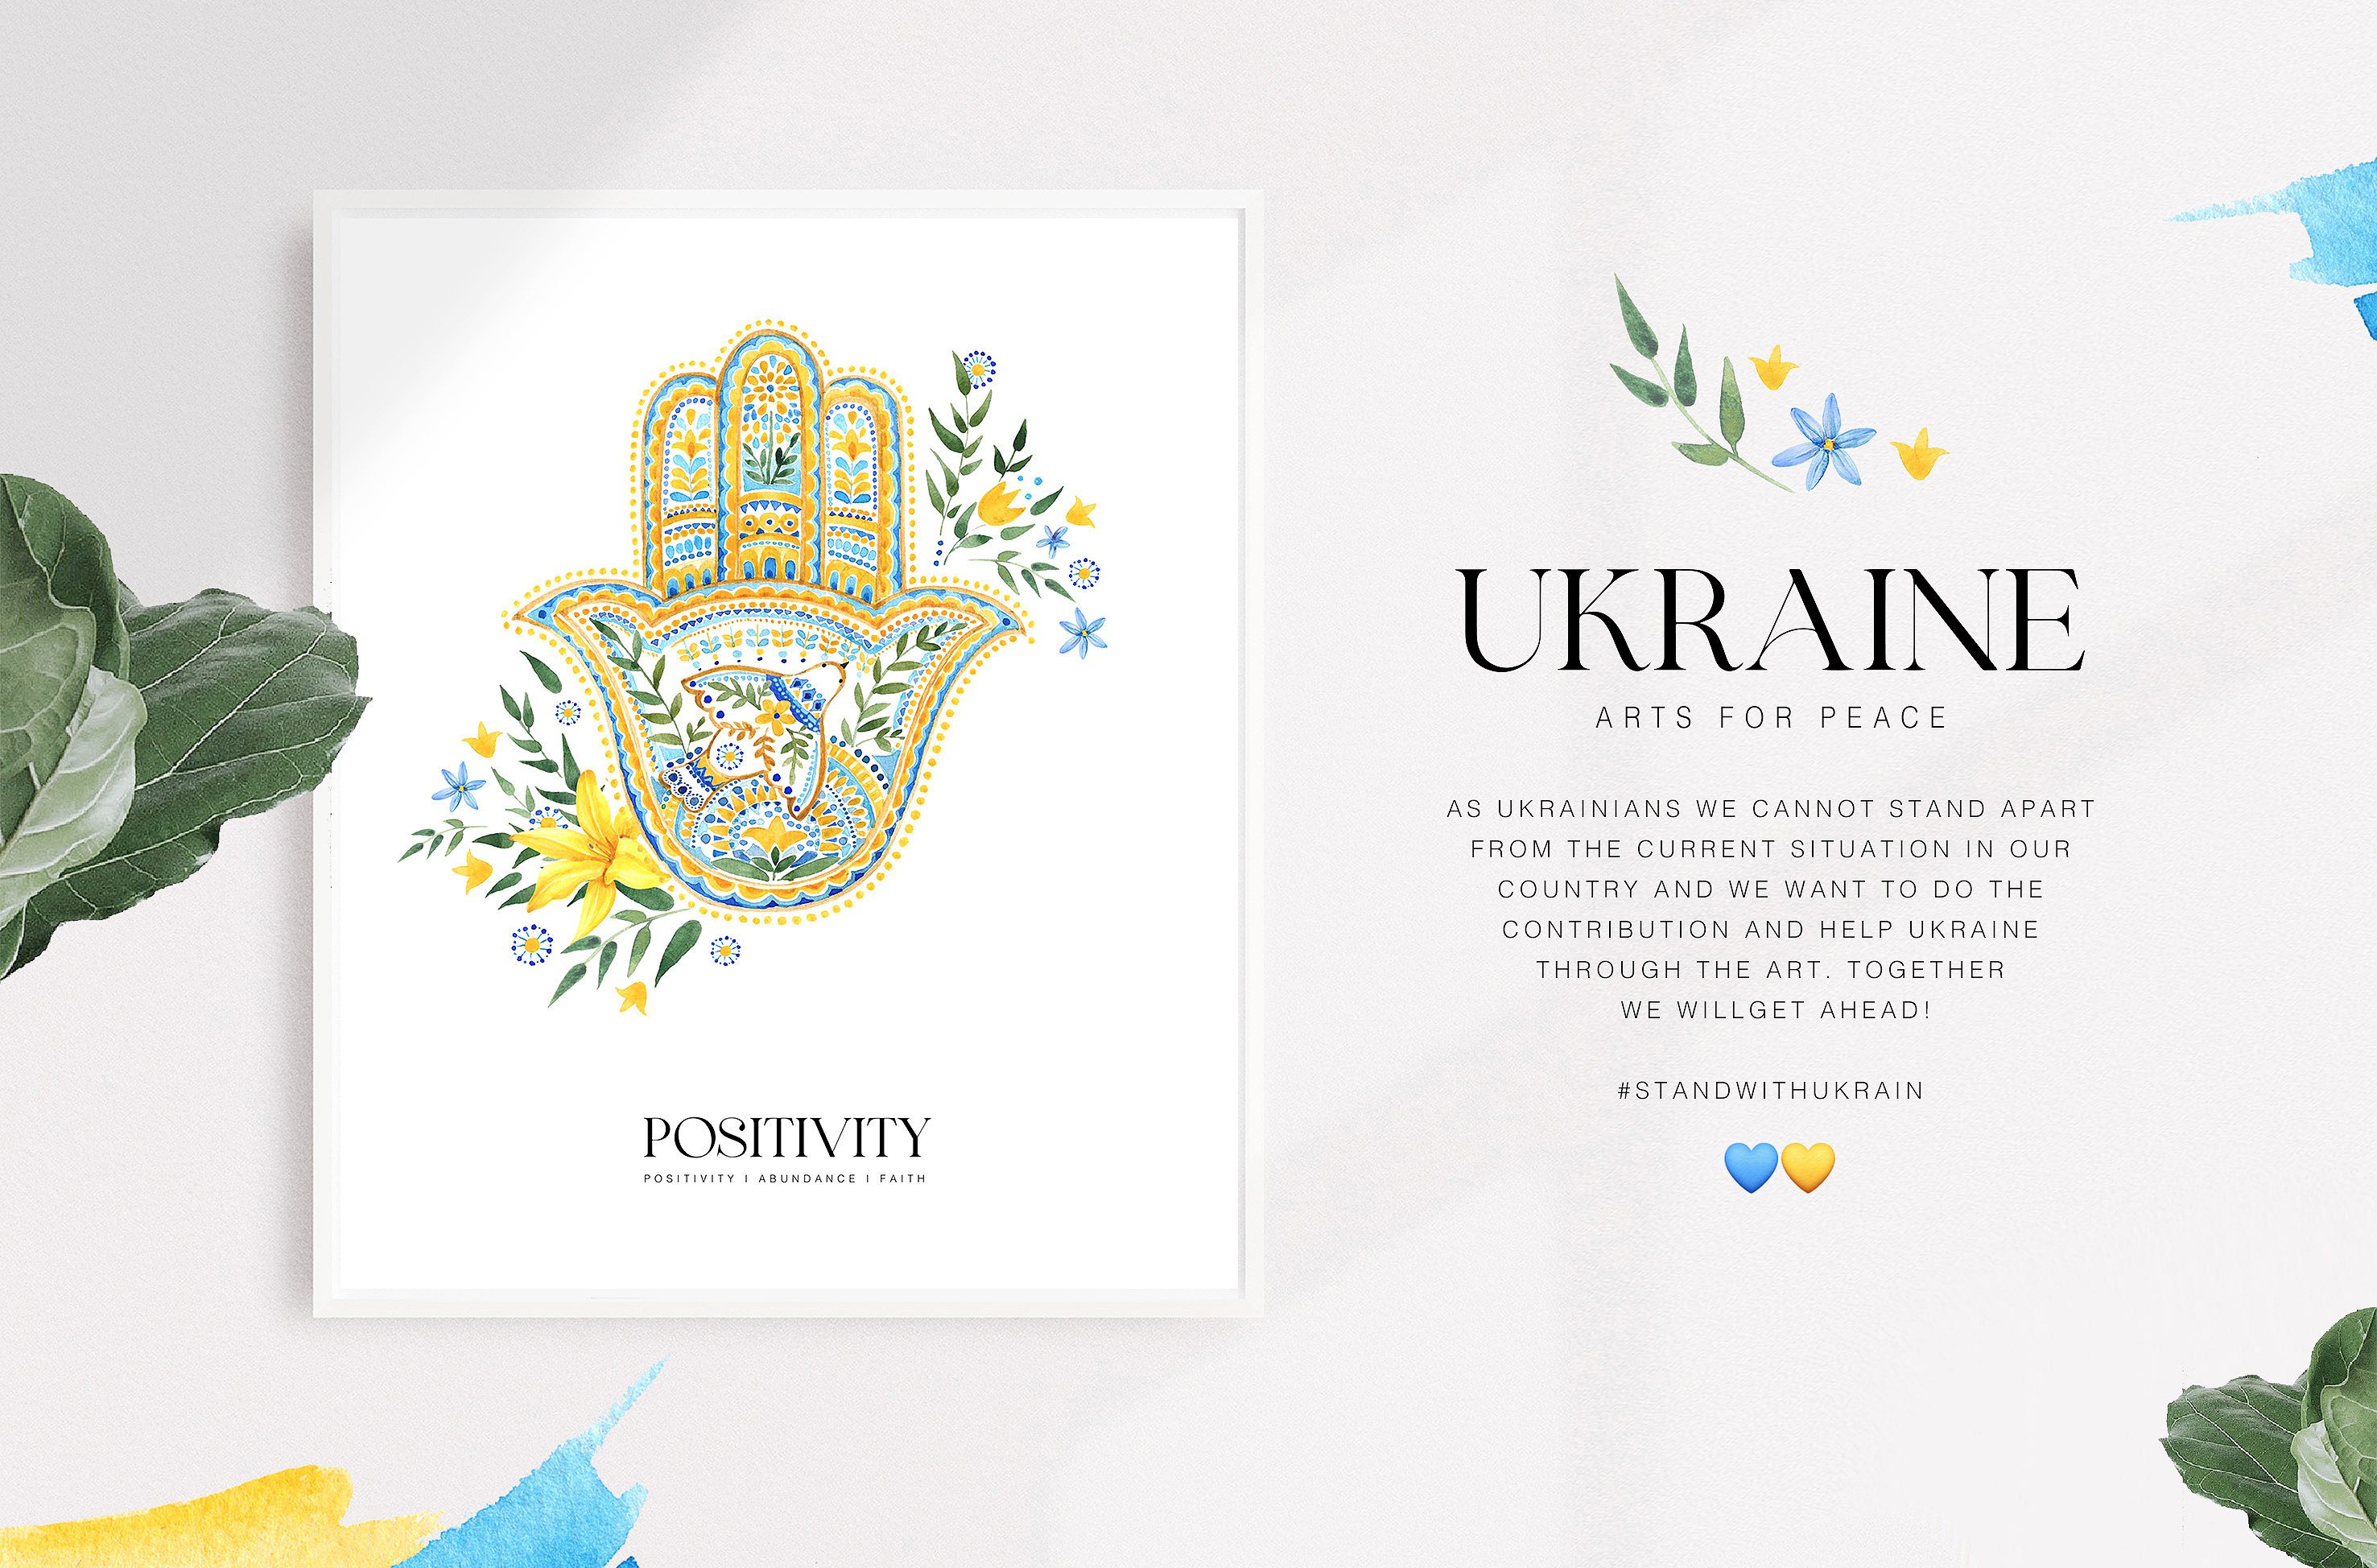 UKRAINE art for peace preview image.